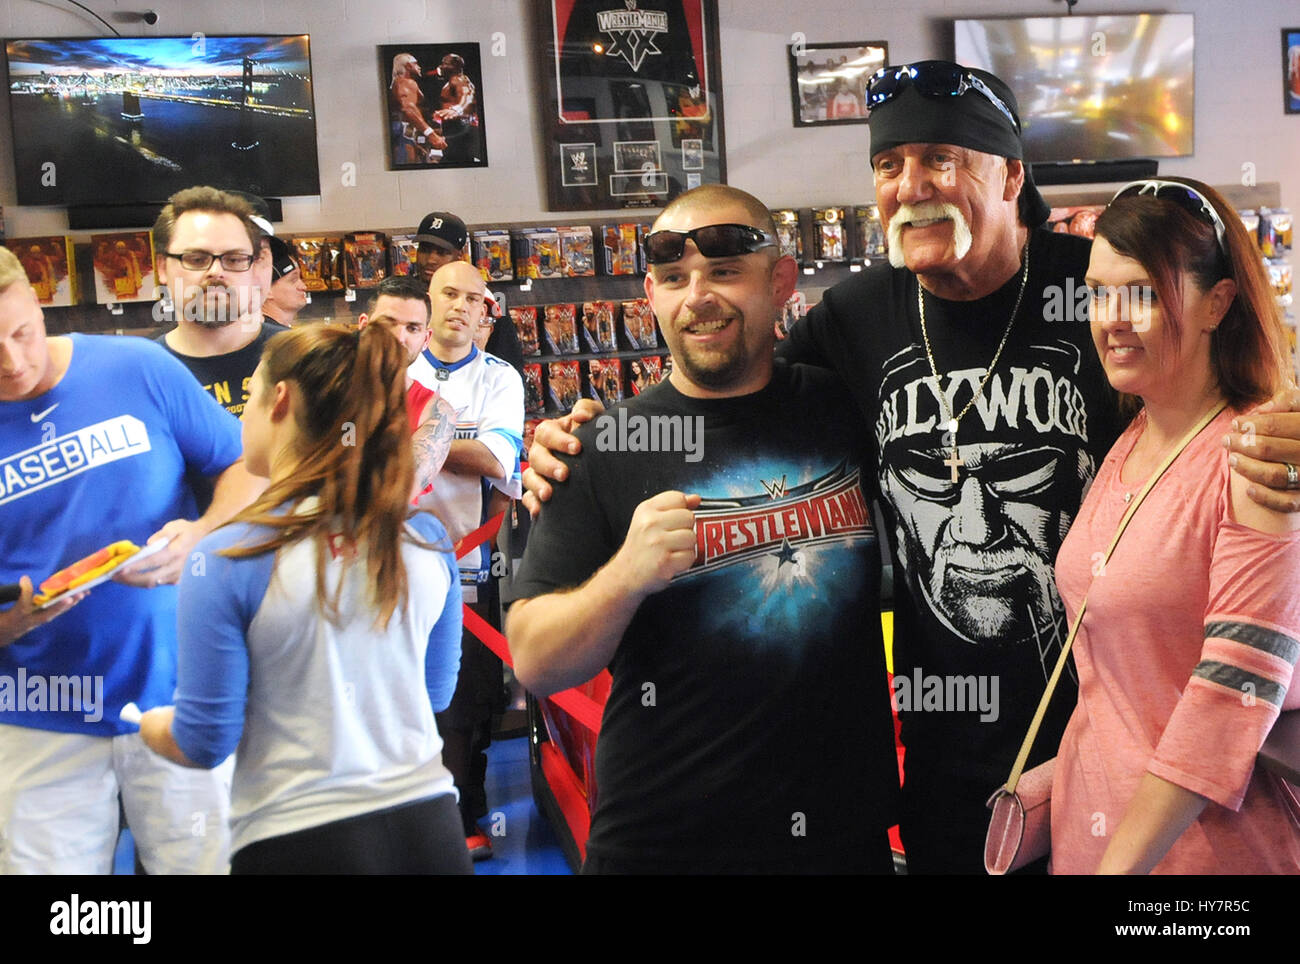 Orlando, Florida, USA. 1st April, 2017. Semi-retired professional wrestler Terry Gene Bollea, better known by his ring name Hulk Hogan, poses for a photograph with fans at Hogan's Beach Shop, his retail merchandise store which opened on March 30, 2017 in Orlando, Florida. Credit: Paul Hennessy/Alamy Live News Stock Photo